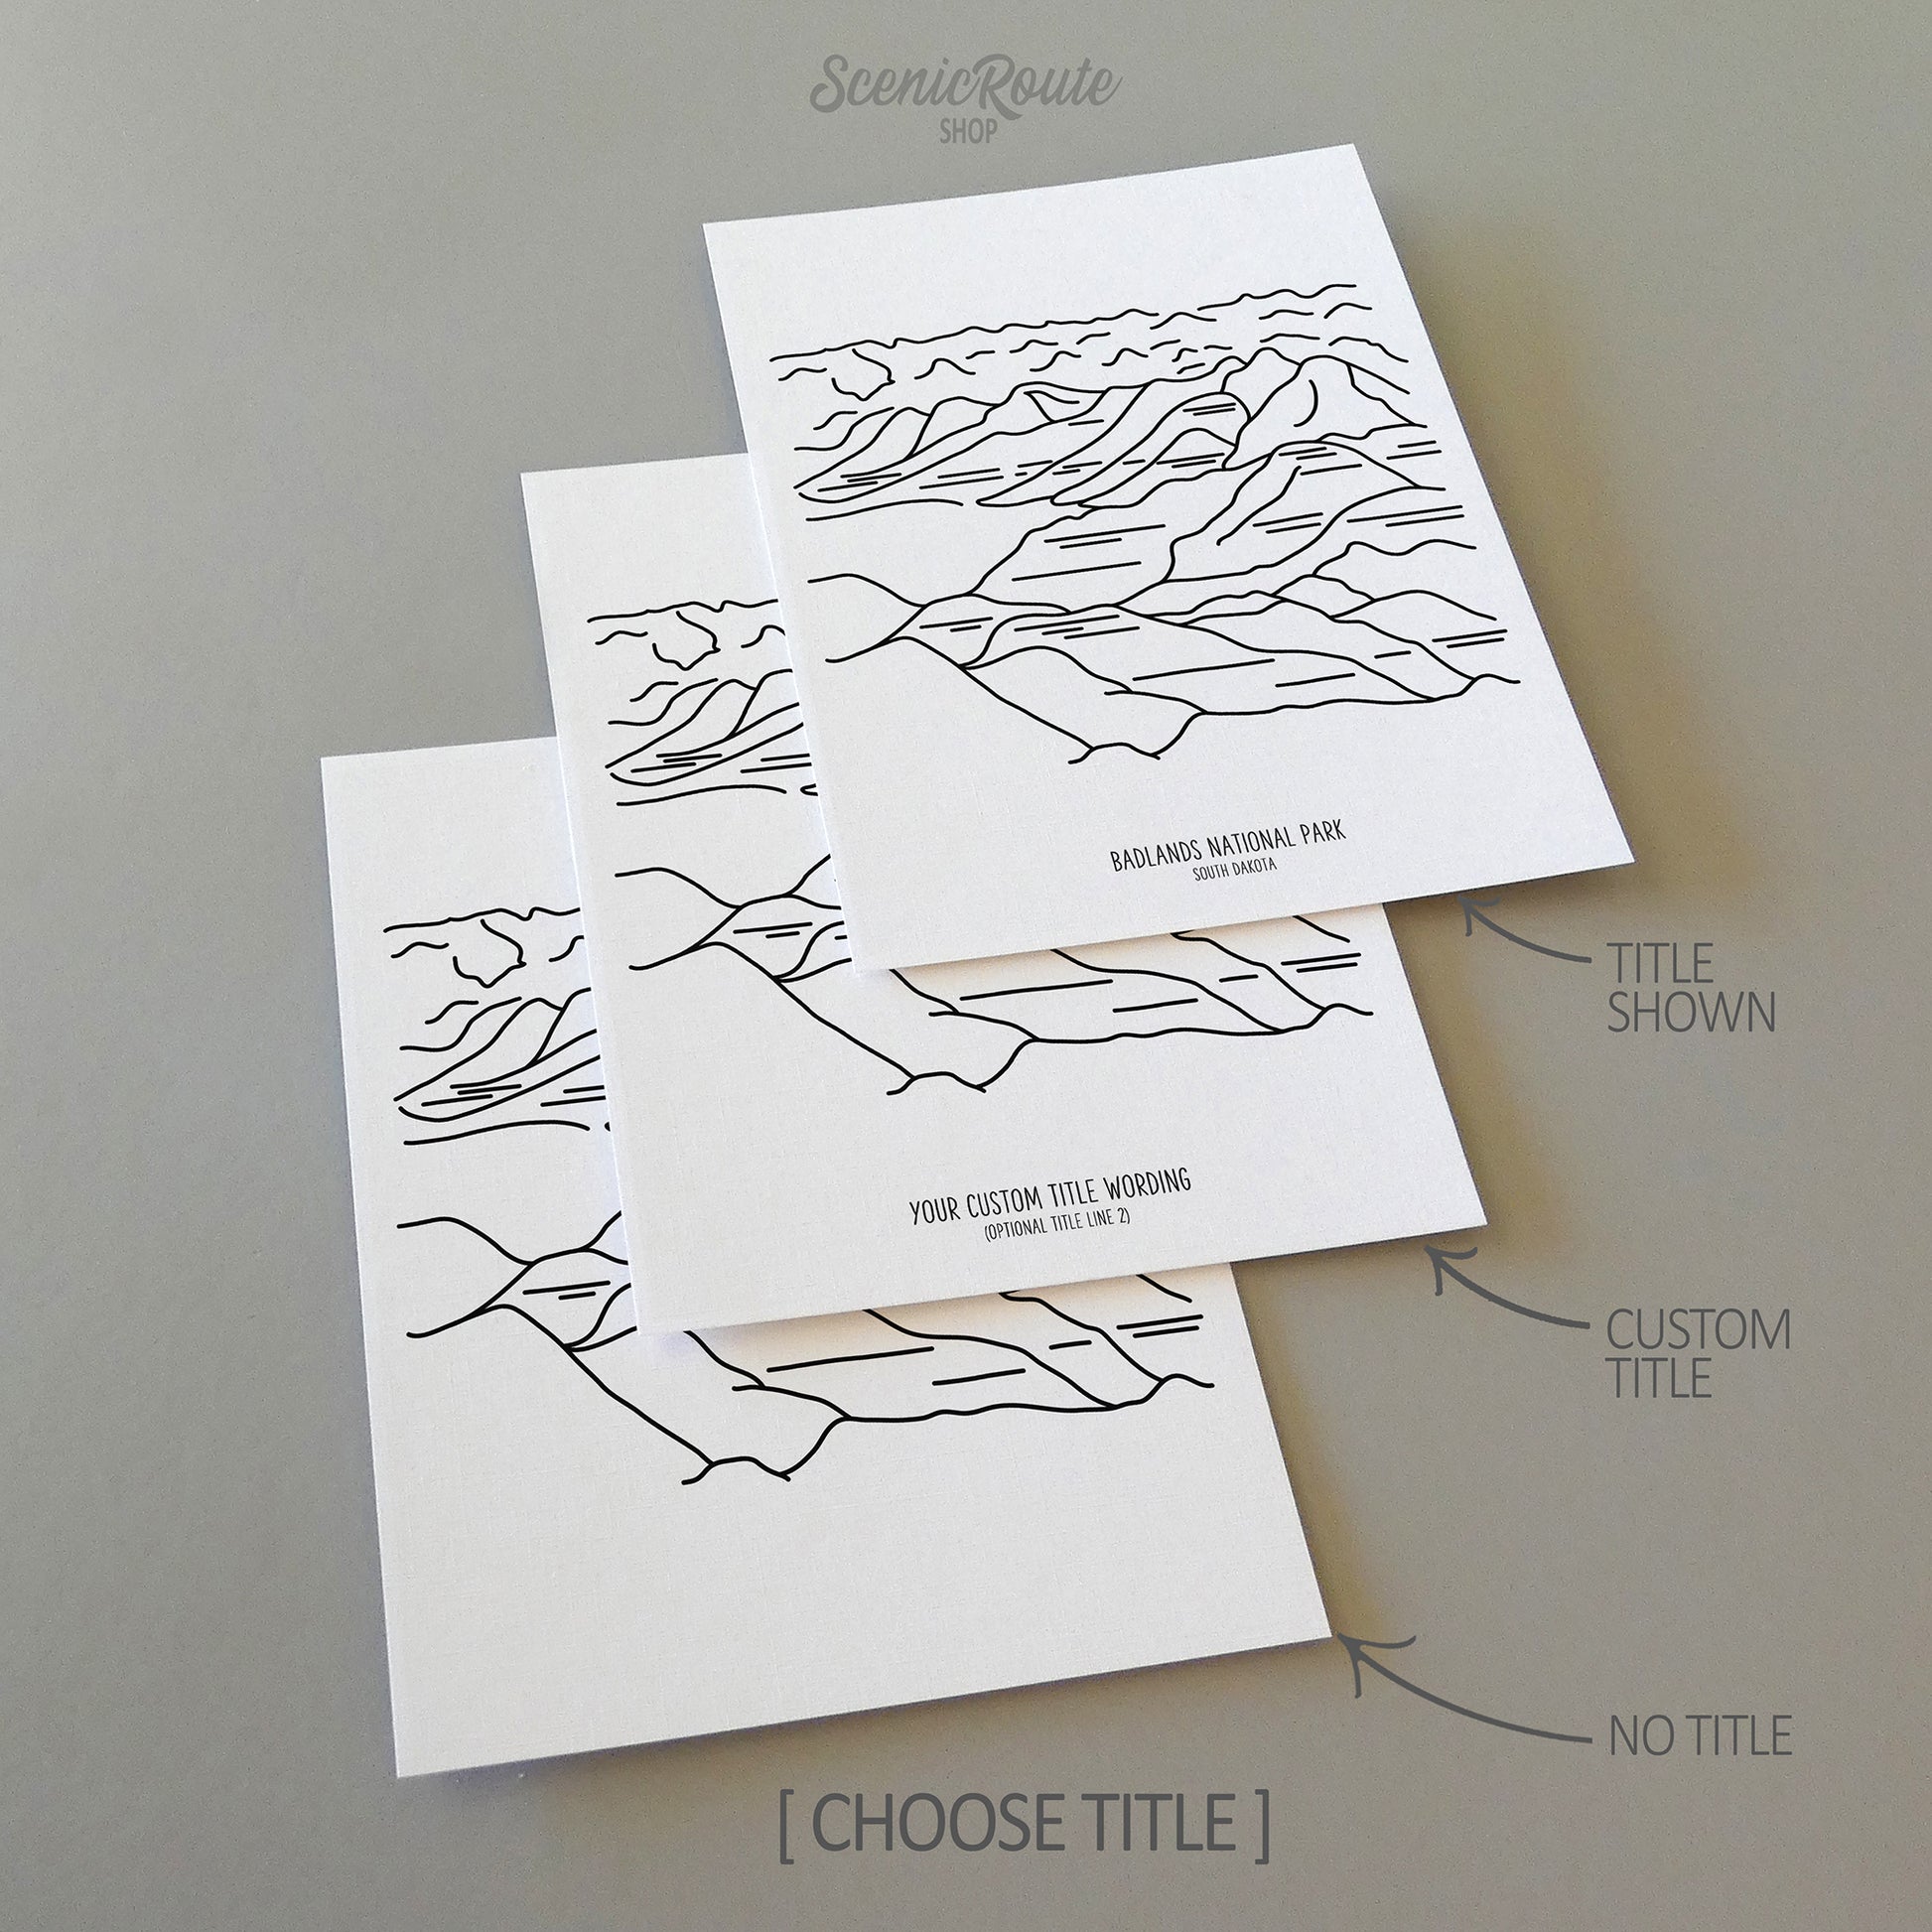 Three line art drawings of Badlands National Park on white linen paper with a gray background. The pieces are shown with title options that can be chosen and personalized.